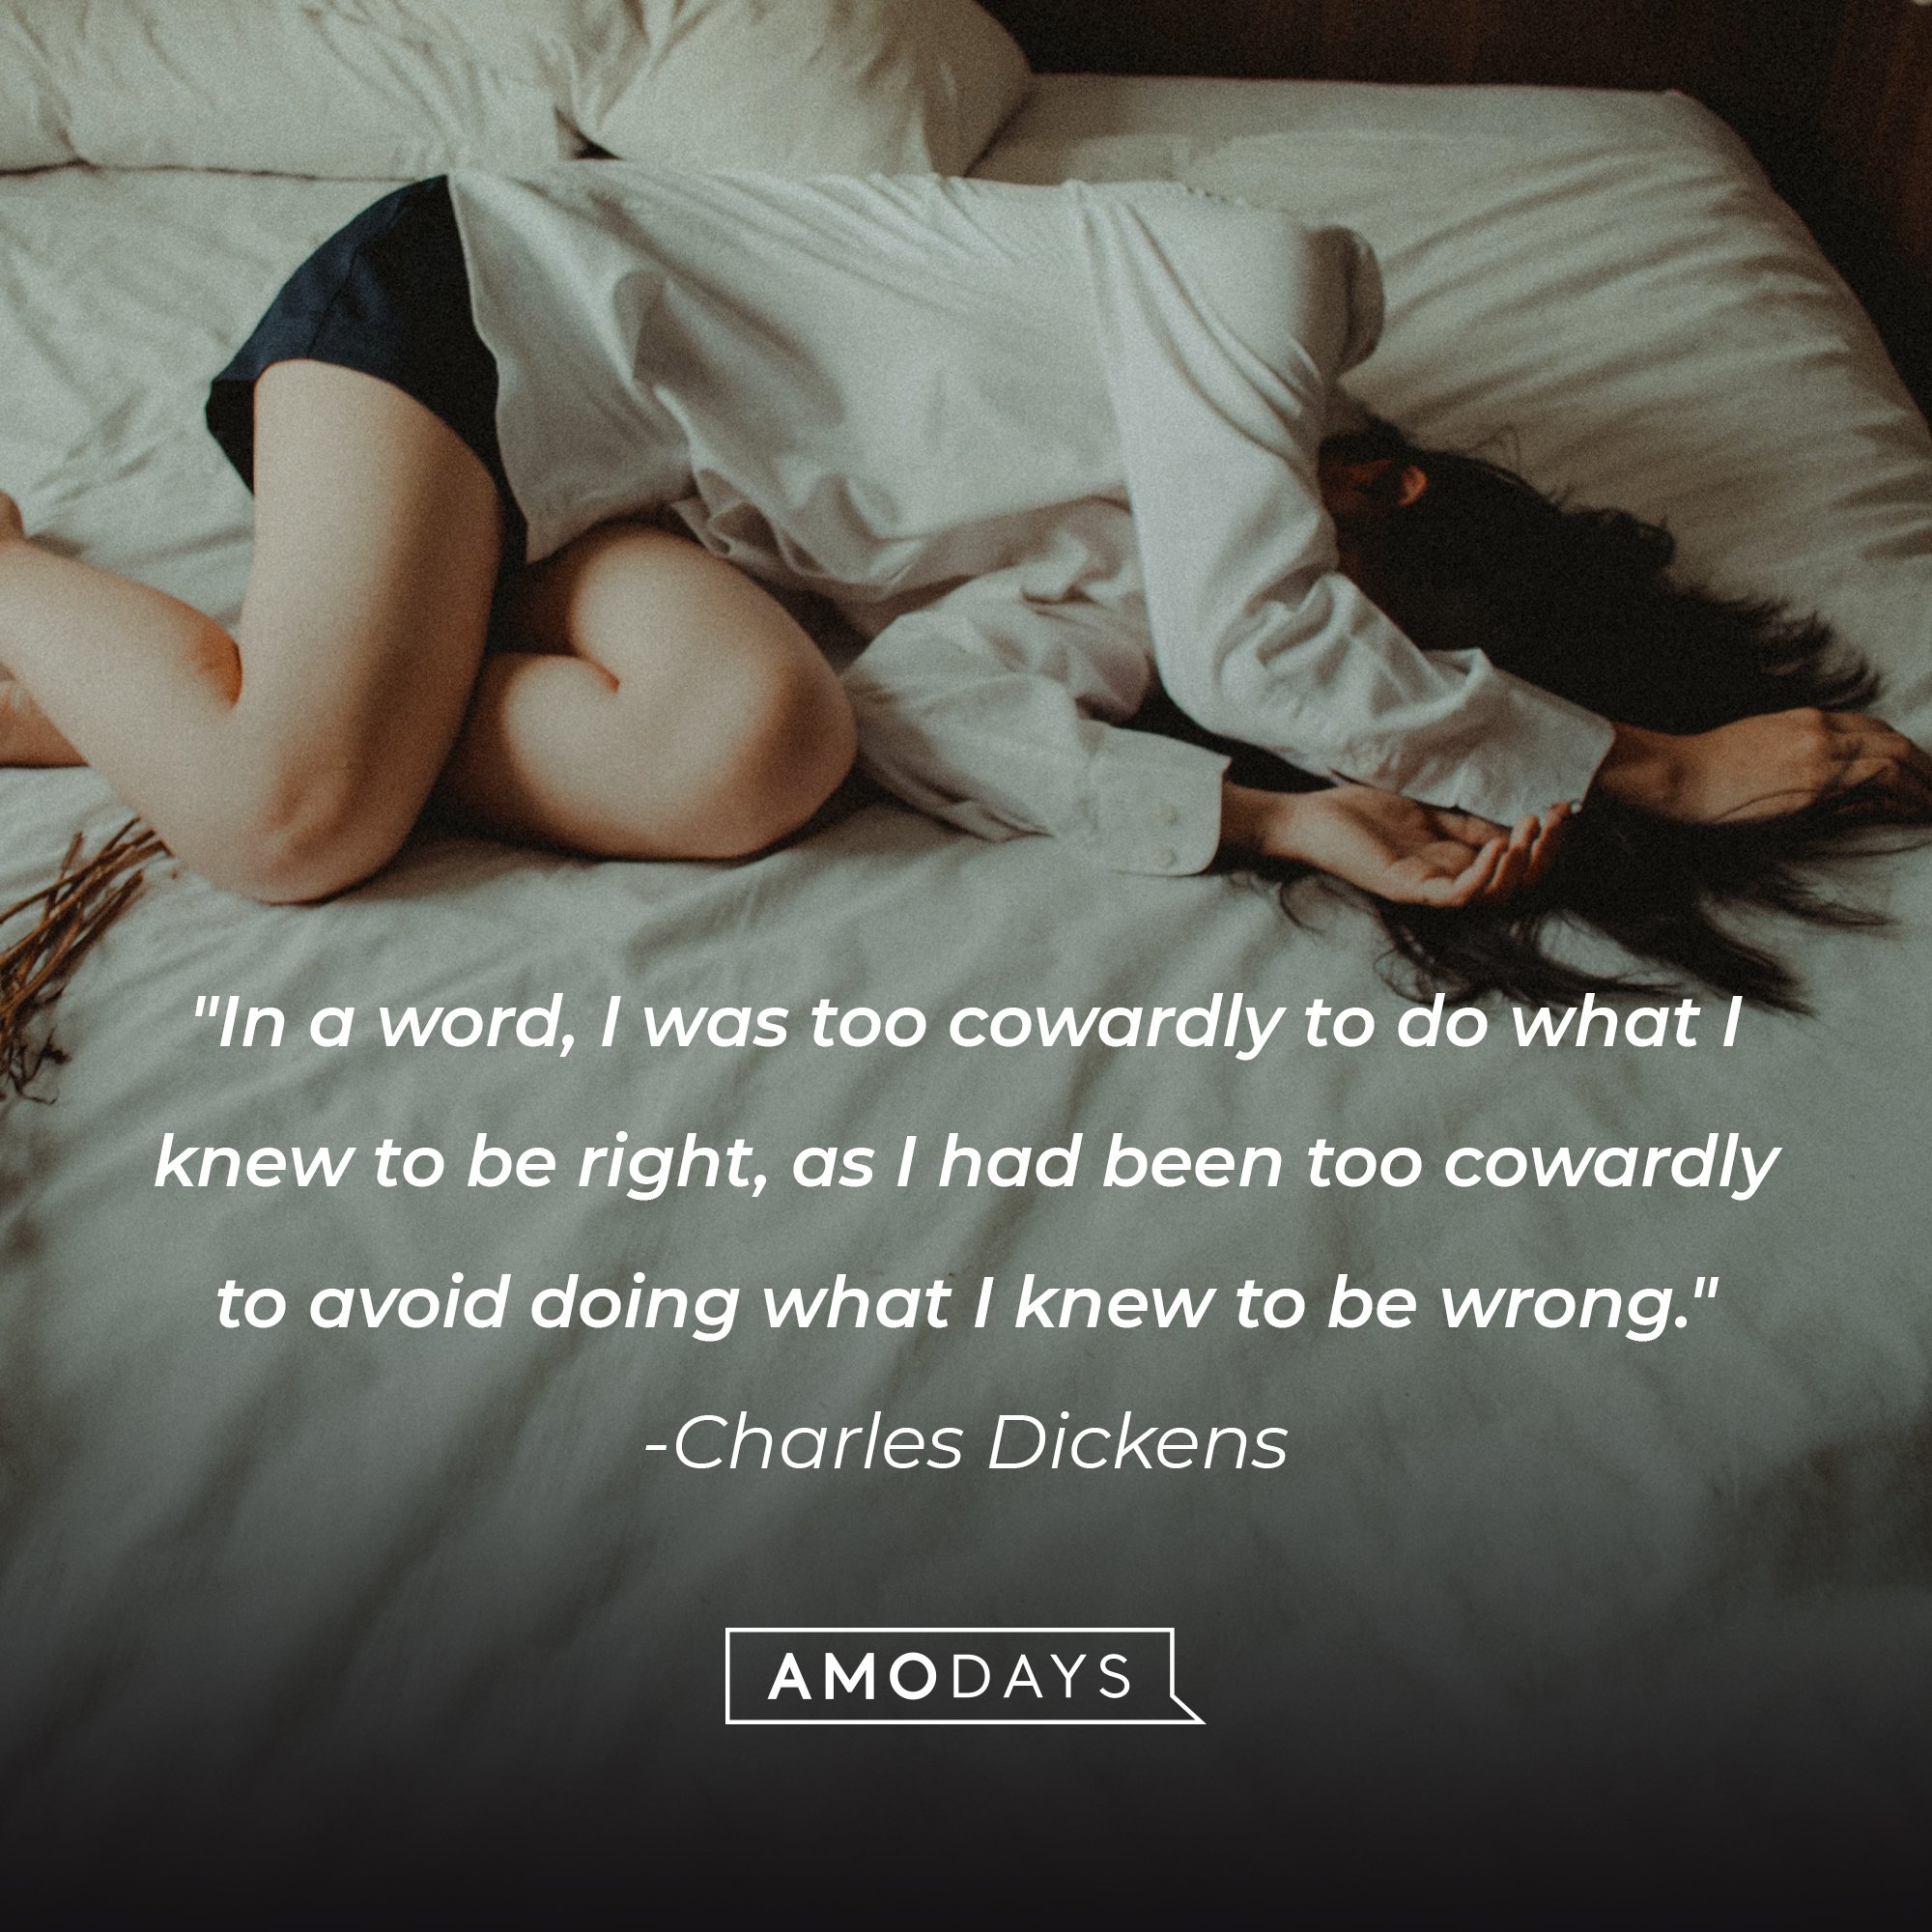 Charles Dickens’s quote: "In a word, I was too cowardly to do what I knew to be right, as I had been too cowardly to avoid doing what I knew to be wrong."  | Image: AmoDays